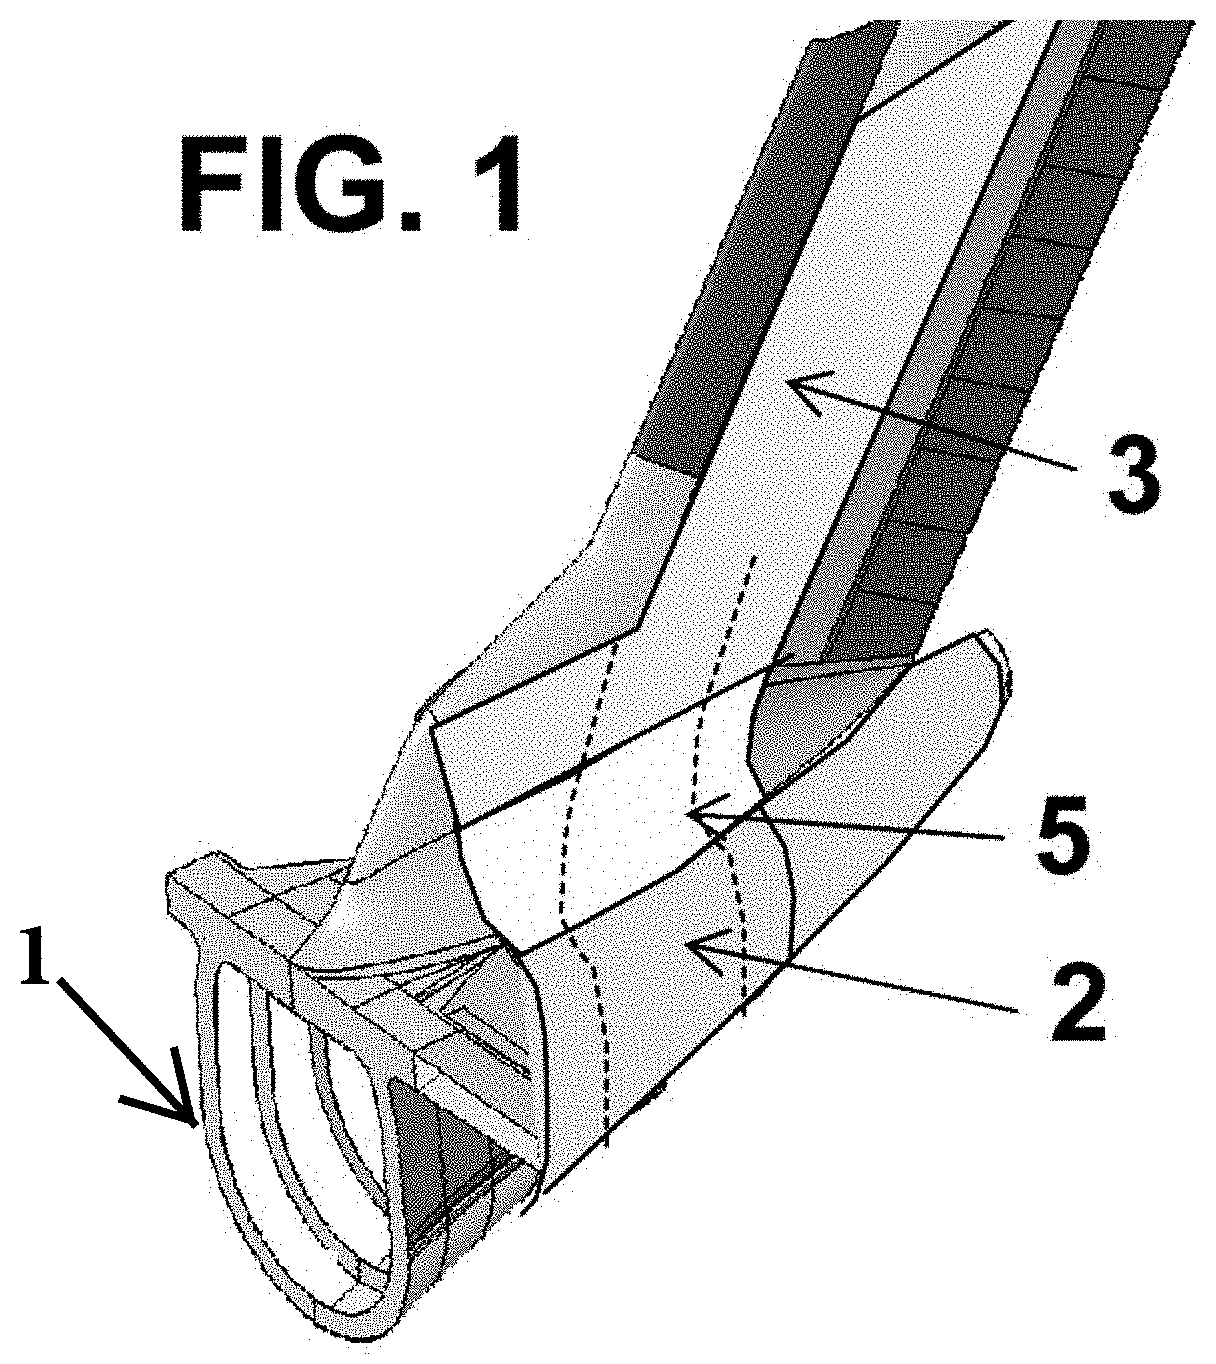 Method for manufacturing a rear section of an aircraft and aircraft rear section manufactured by said method